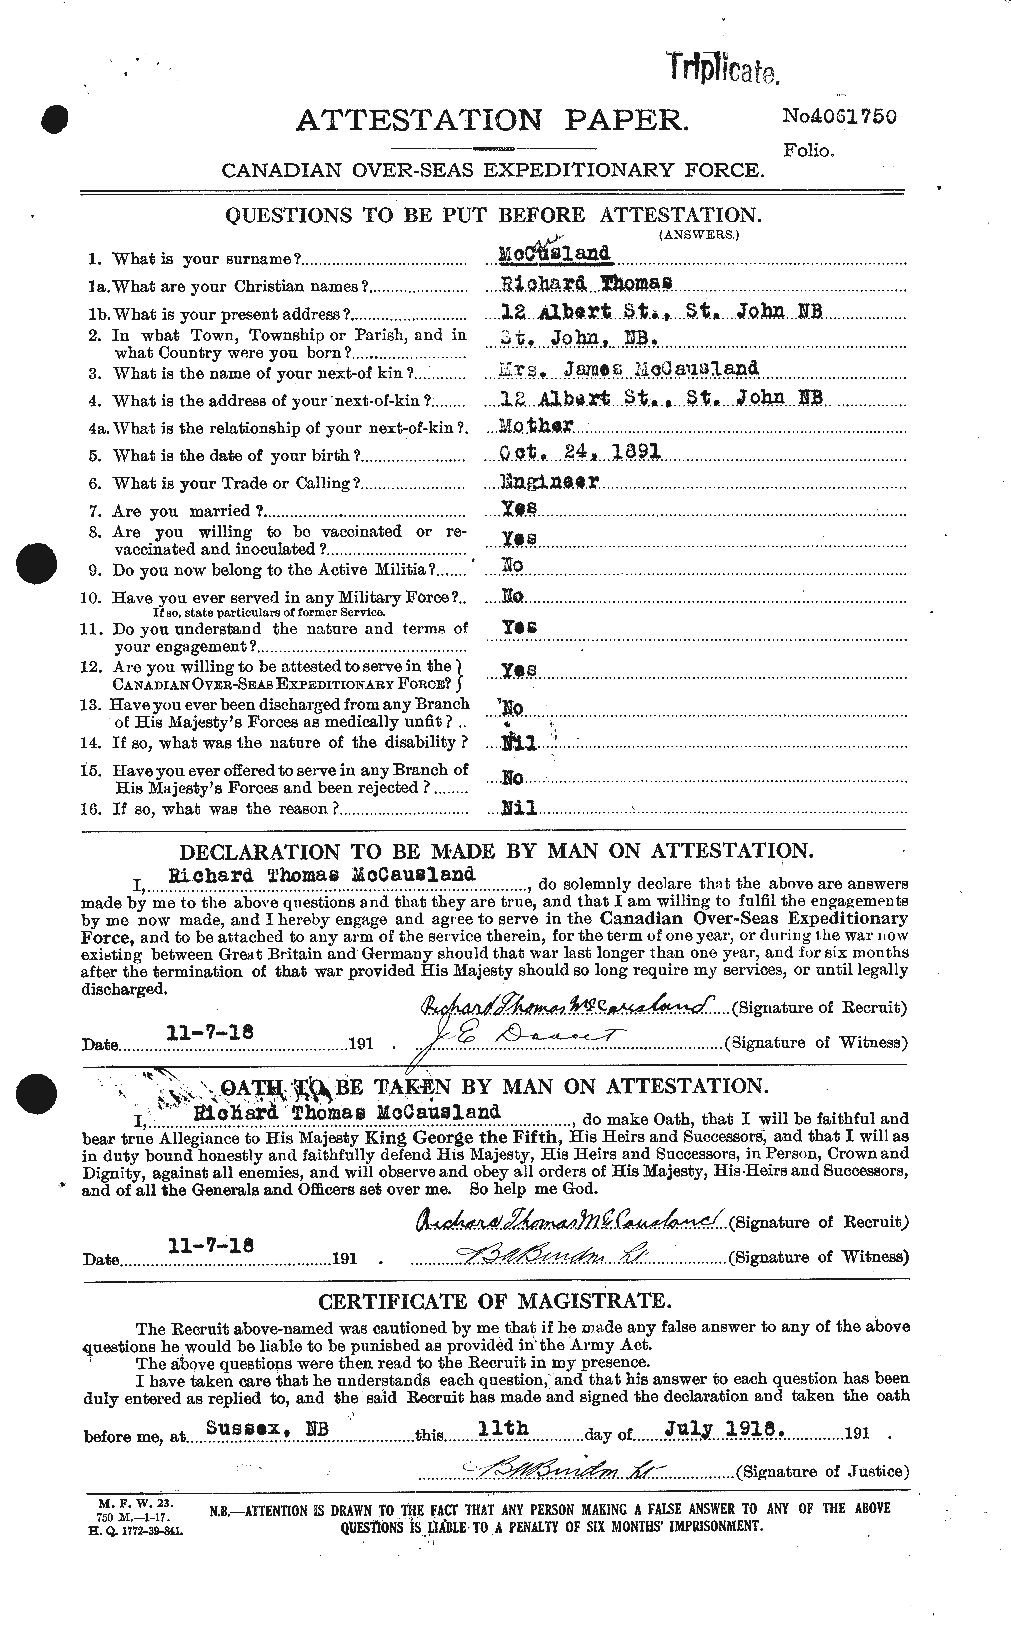 Personnel Records of the First World War - CEF 132561a